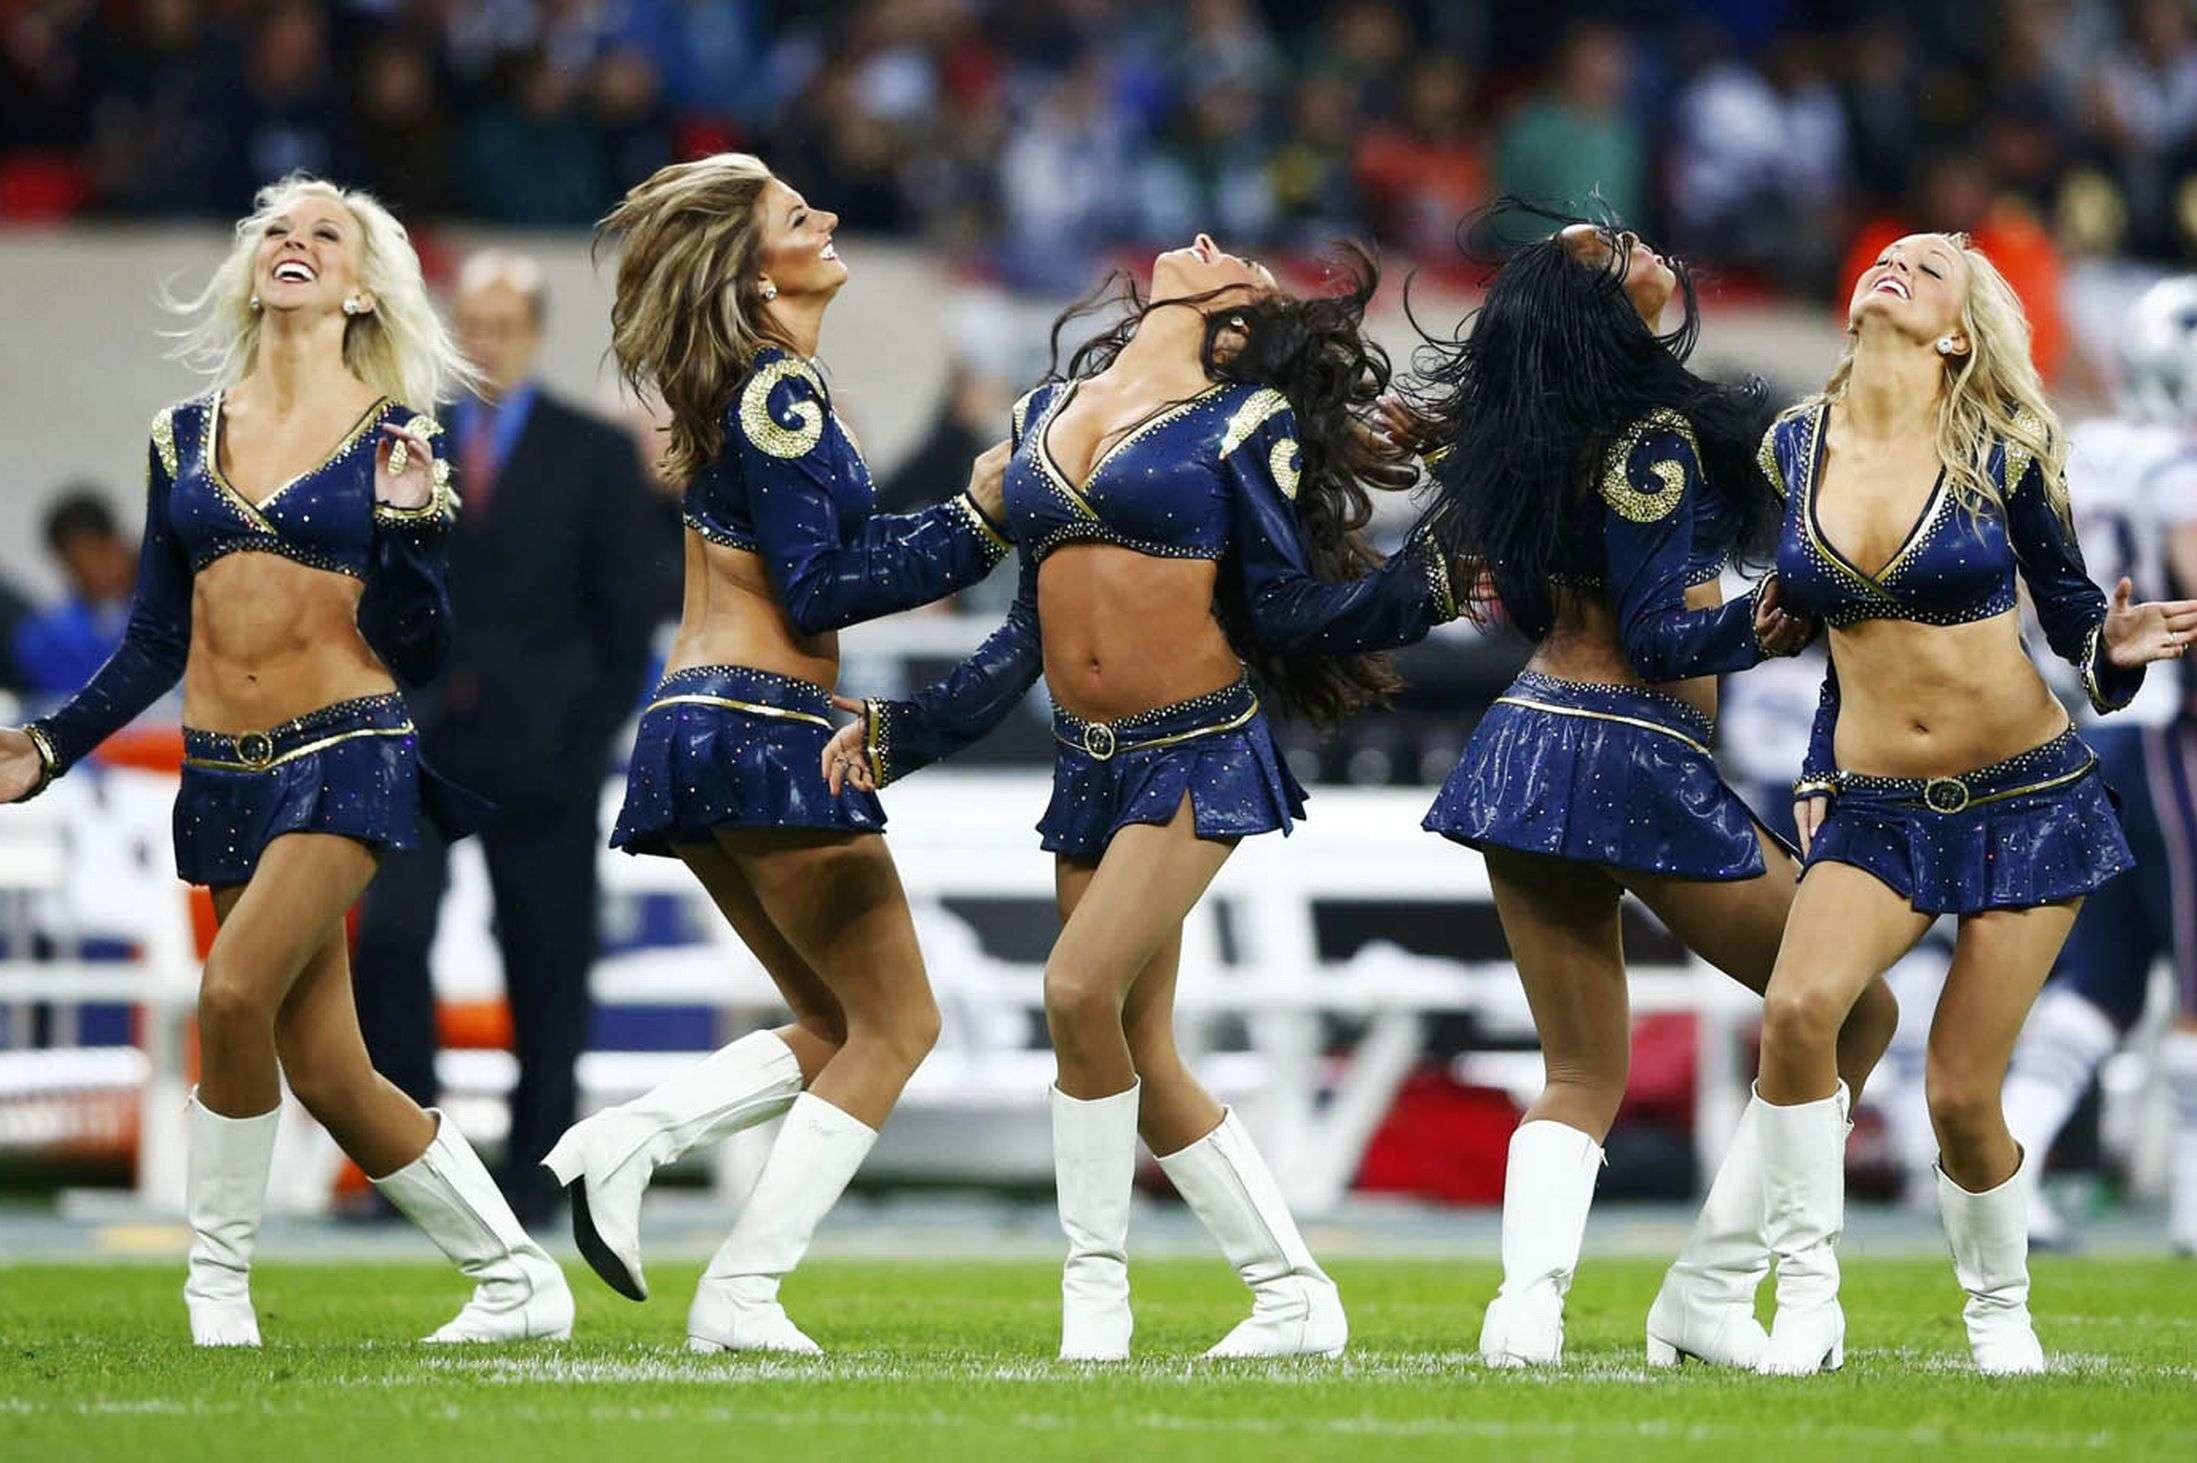 2197x1463 wallpaper.wiki-St-Louis-Rams-Cheerleader-Picture-PIC-